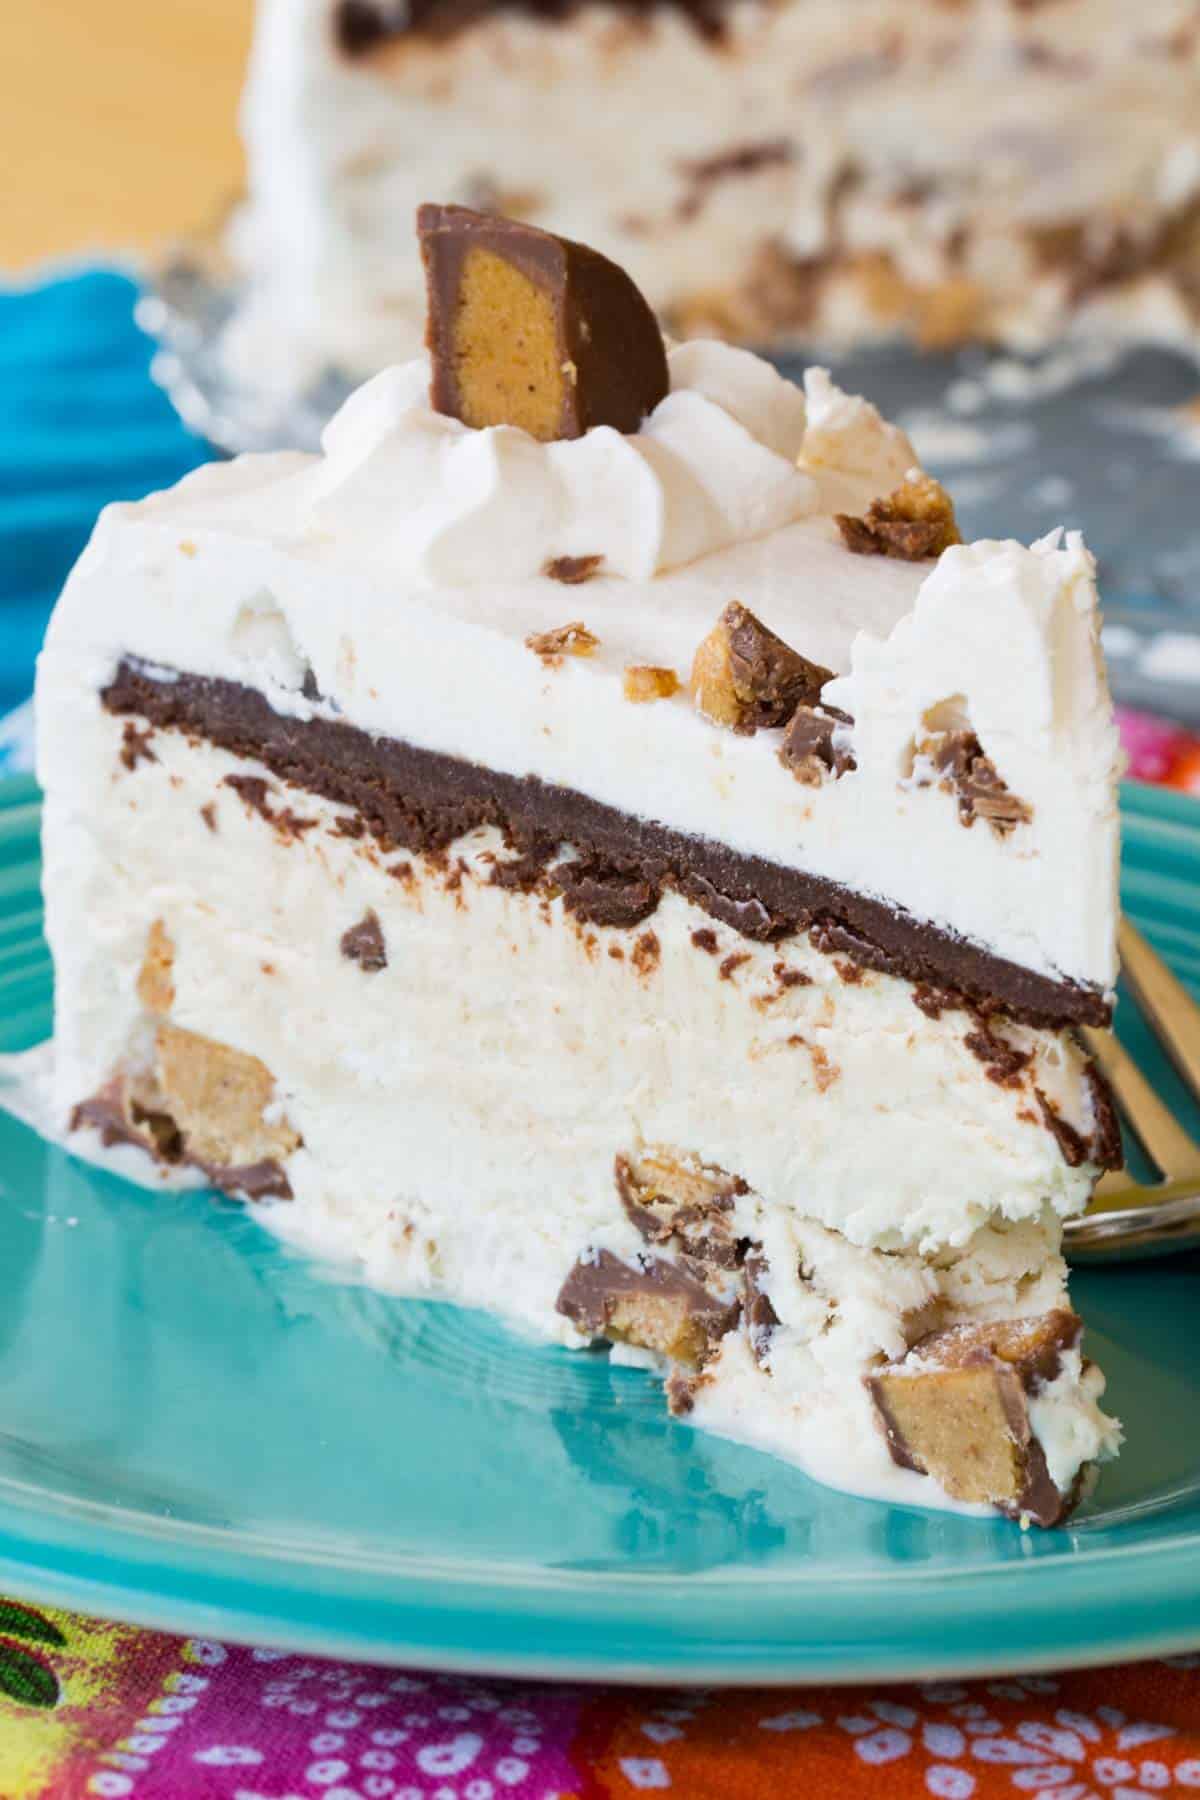 A thick slice of Reese's Ice Cream Cake on a plate.